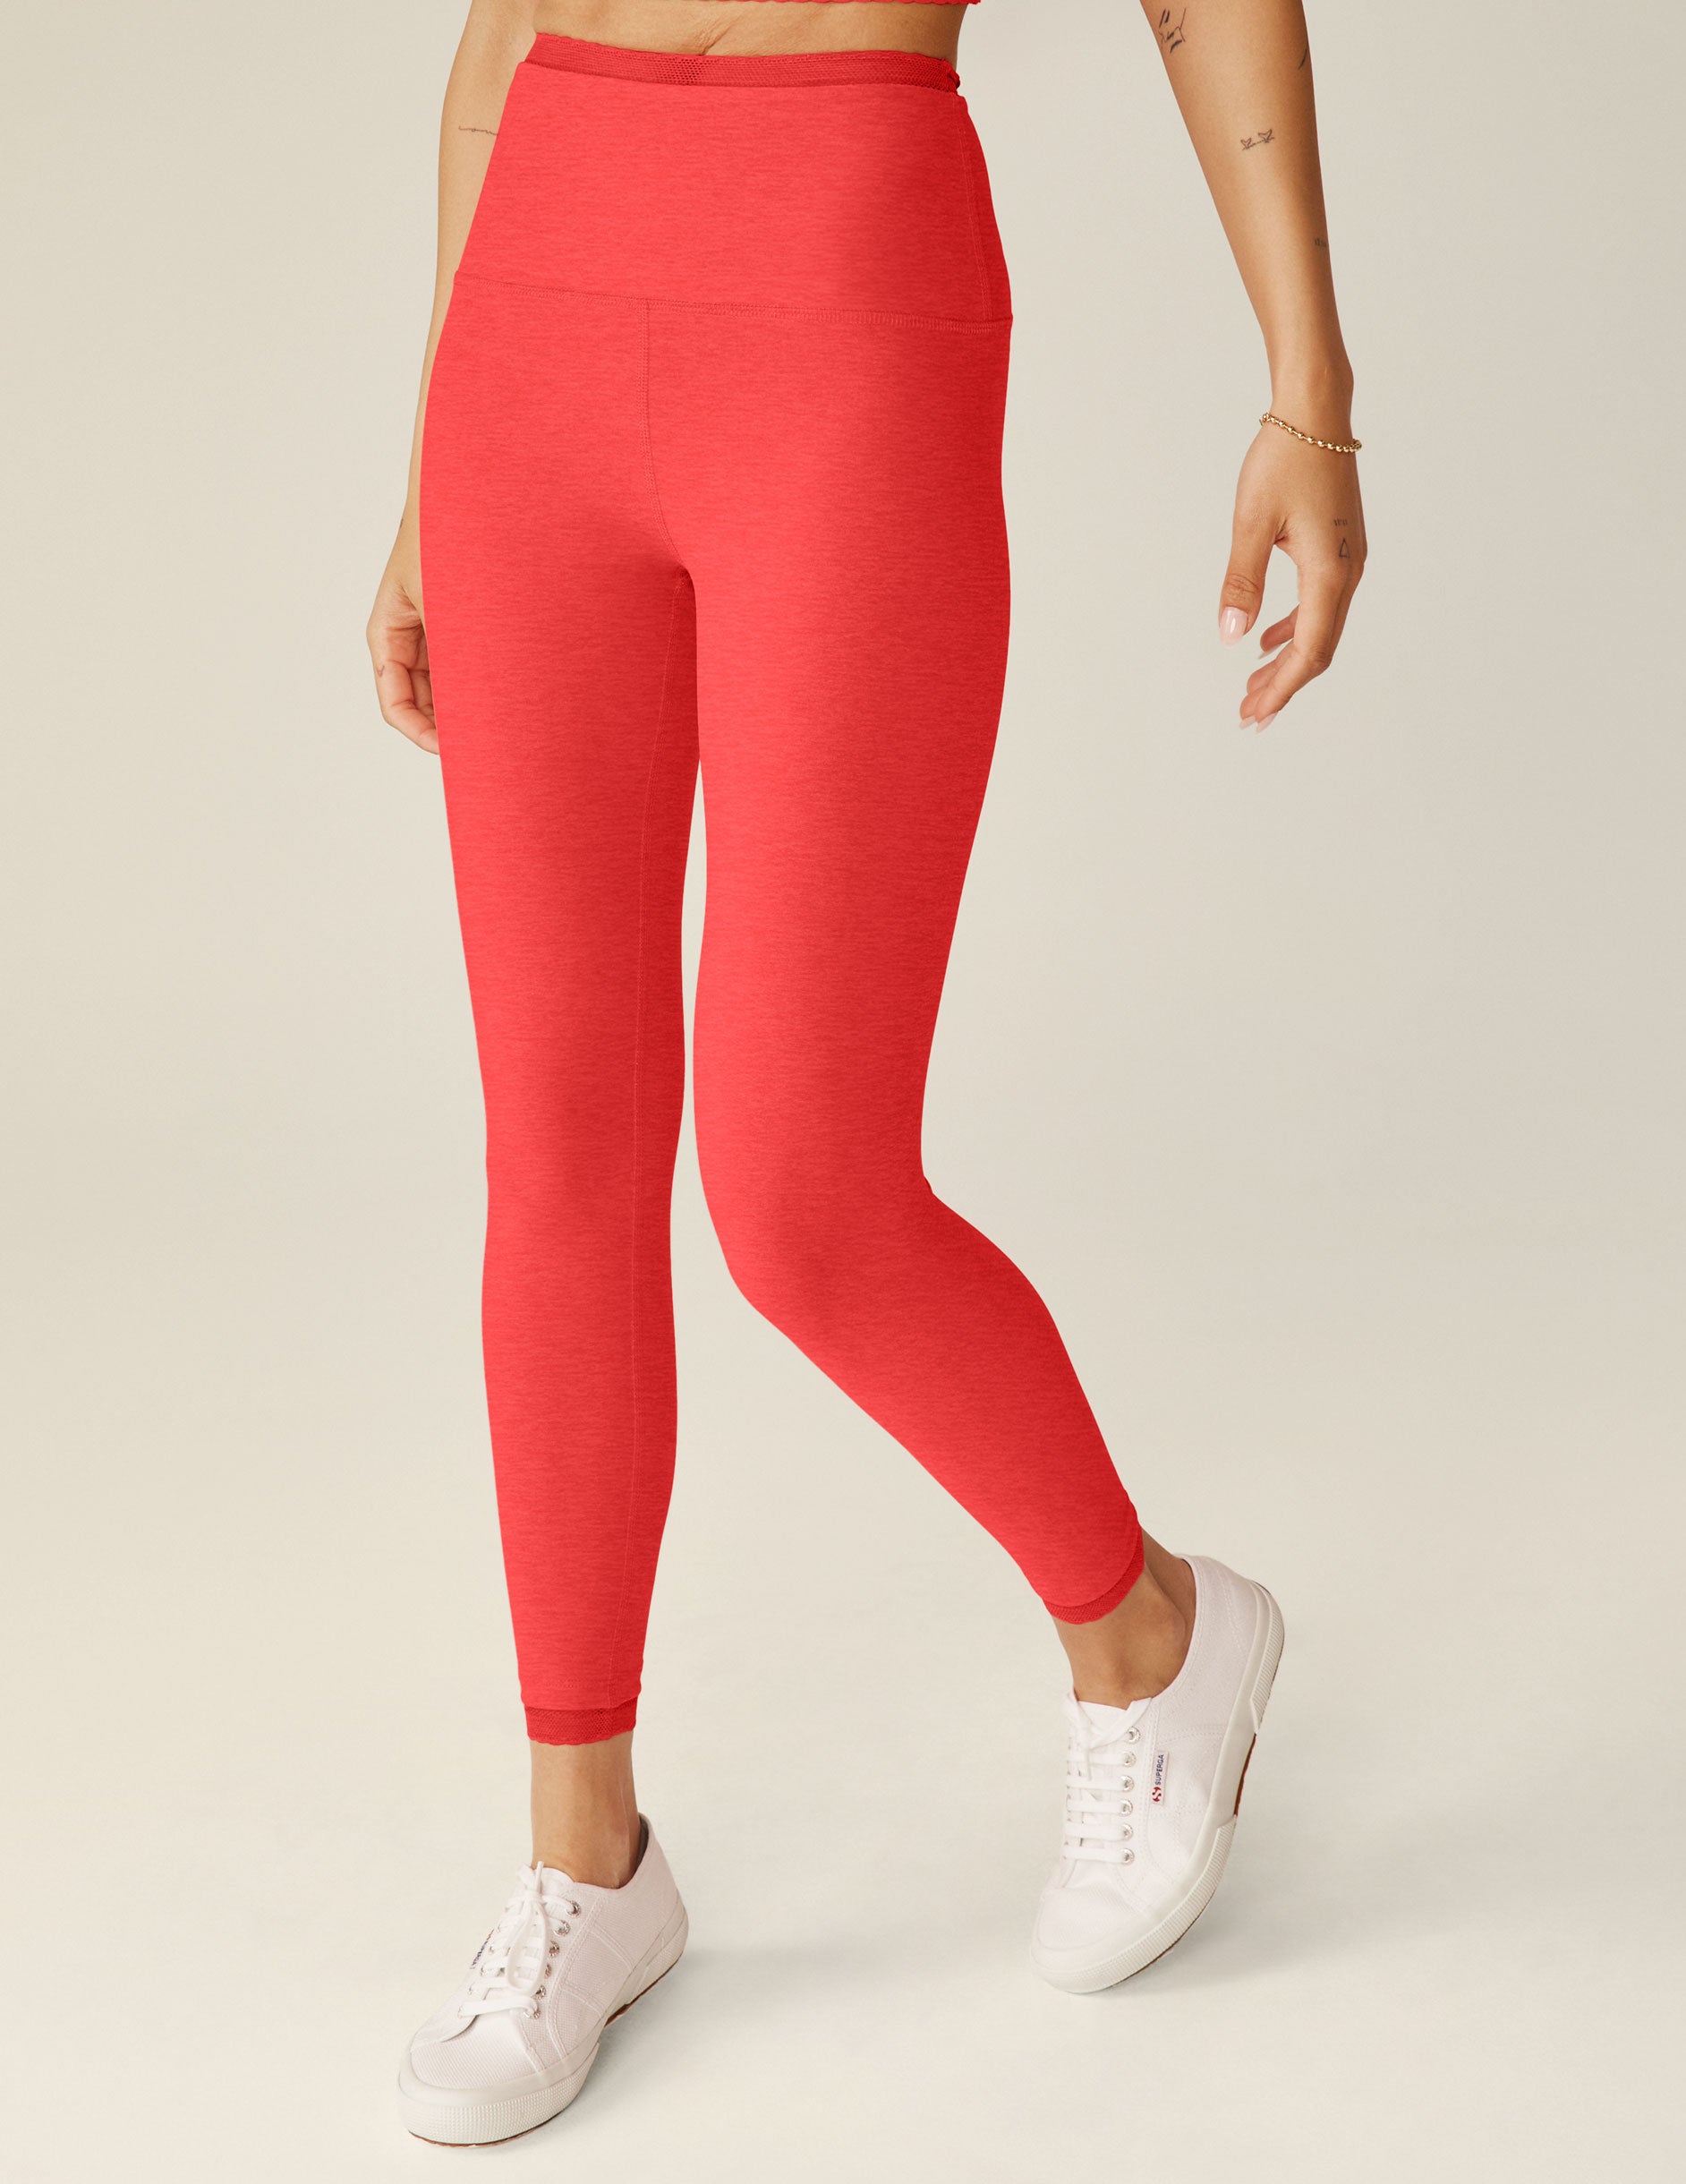 red high-waisted midi leggings with lace trim at the waistband and lace trim at ankles.